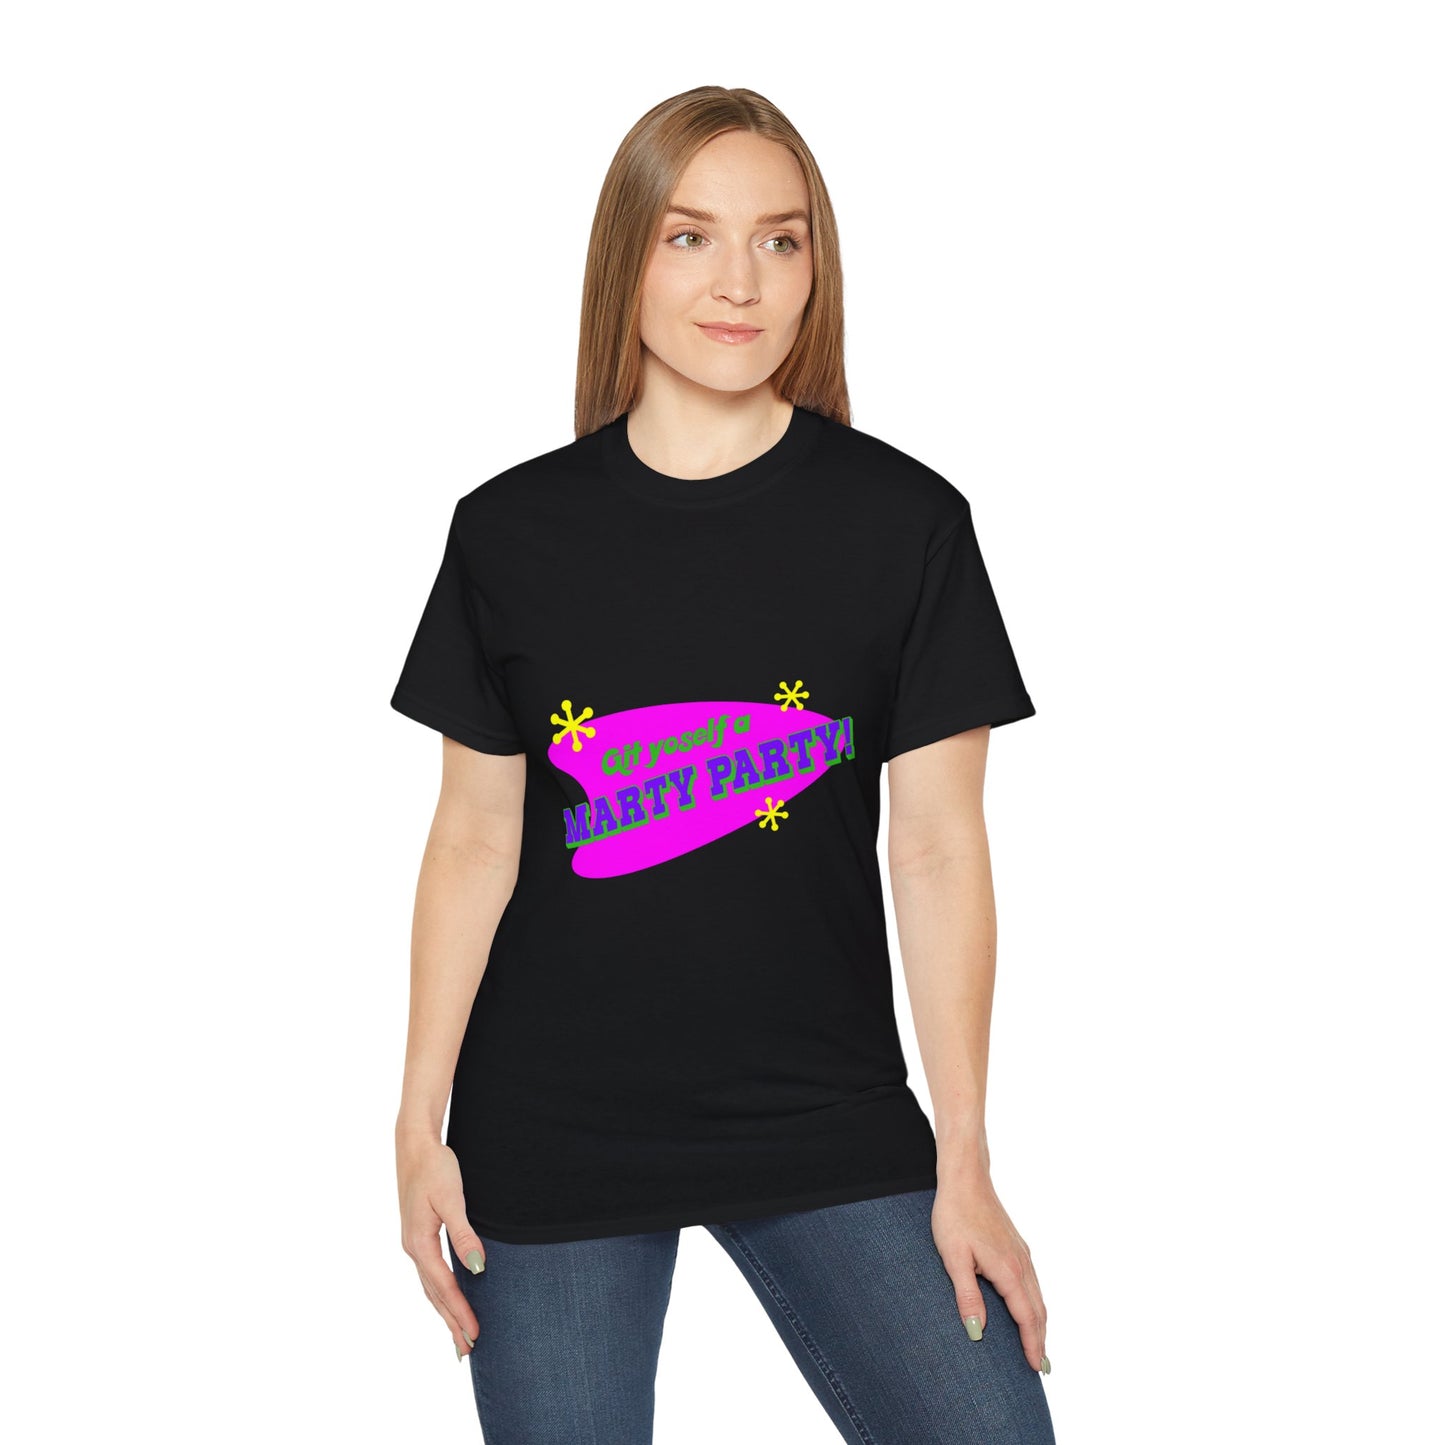 Marty Party Unisex Ultra Cotton Tee